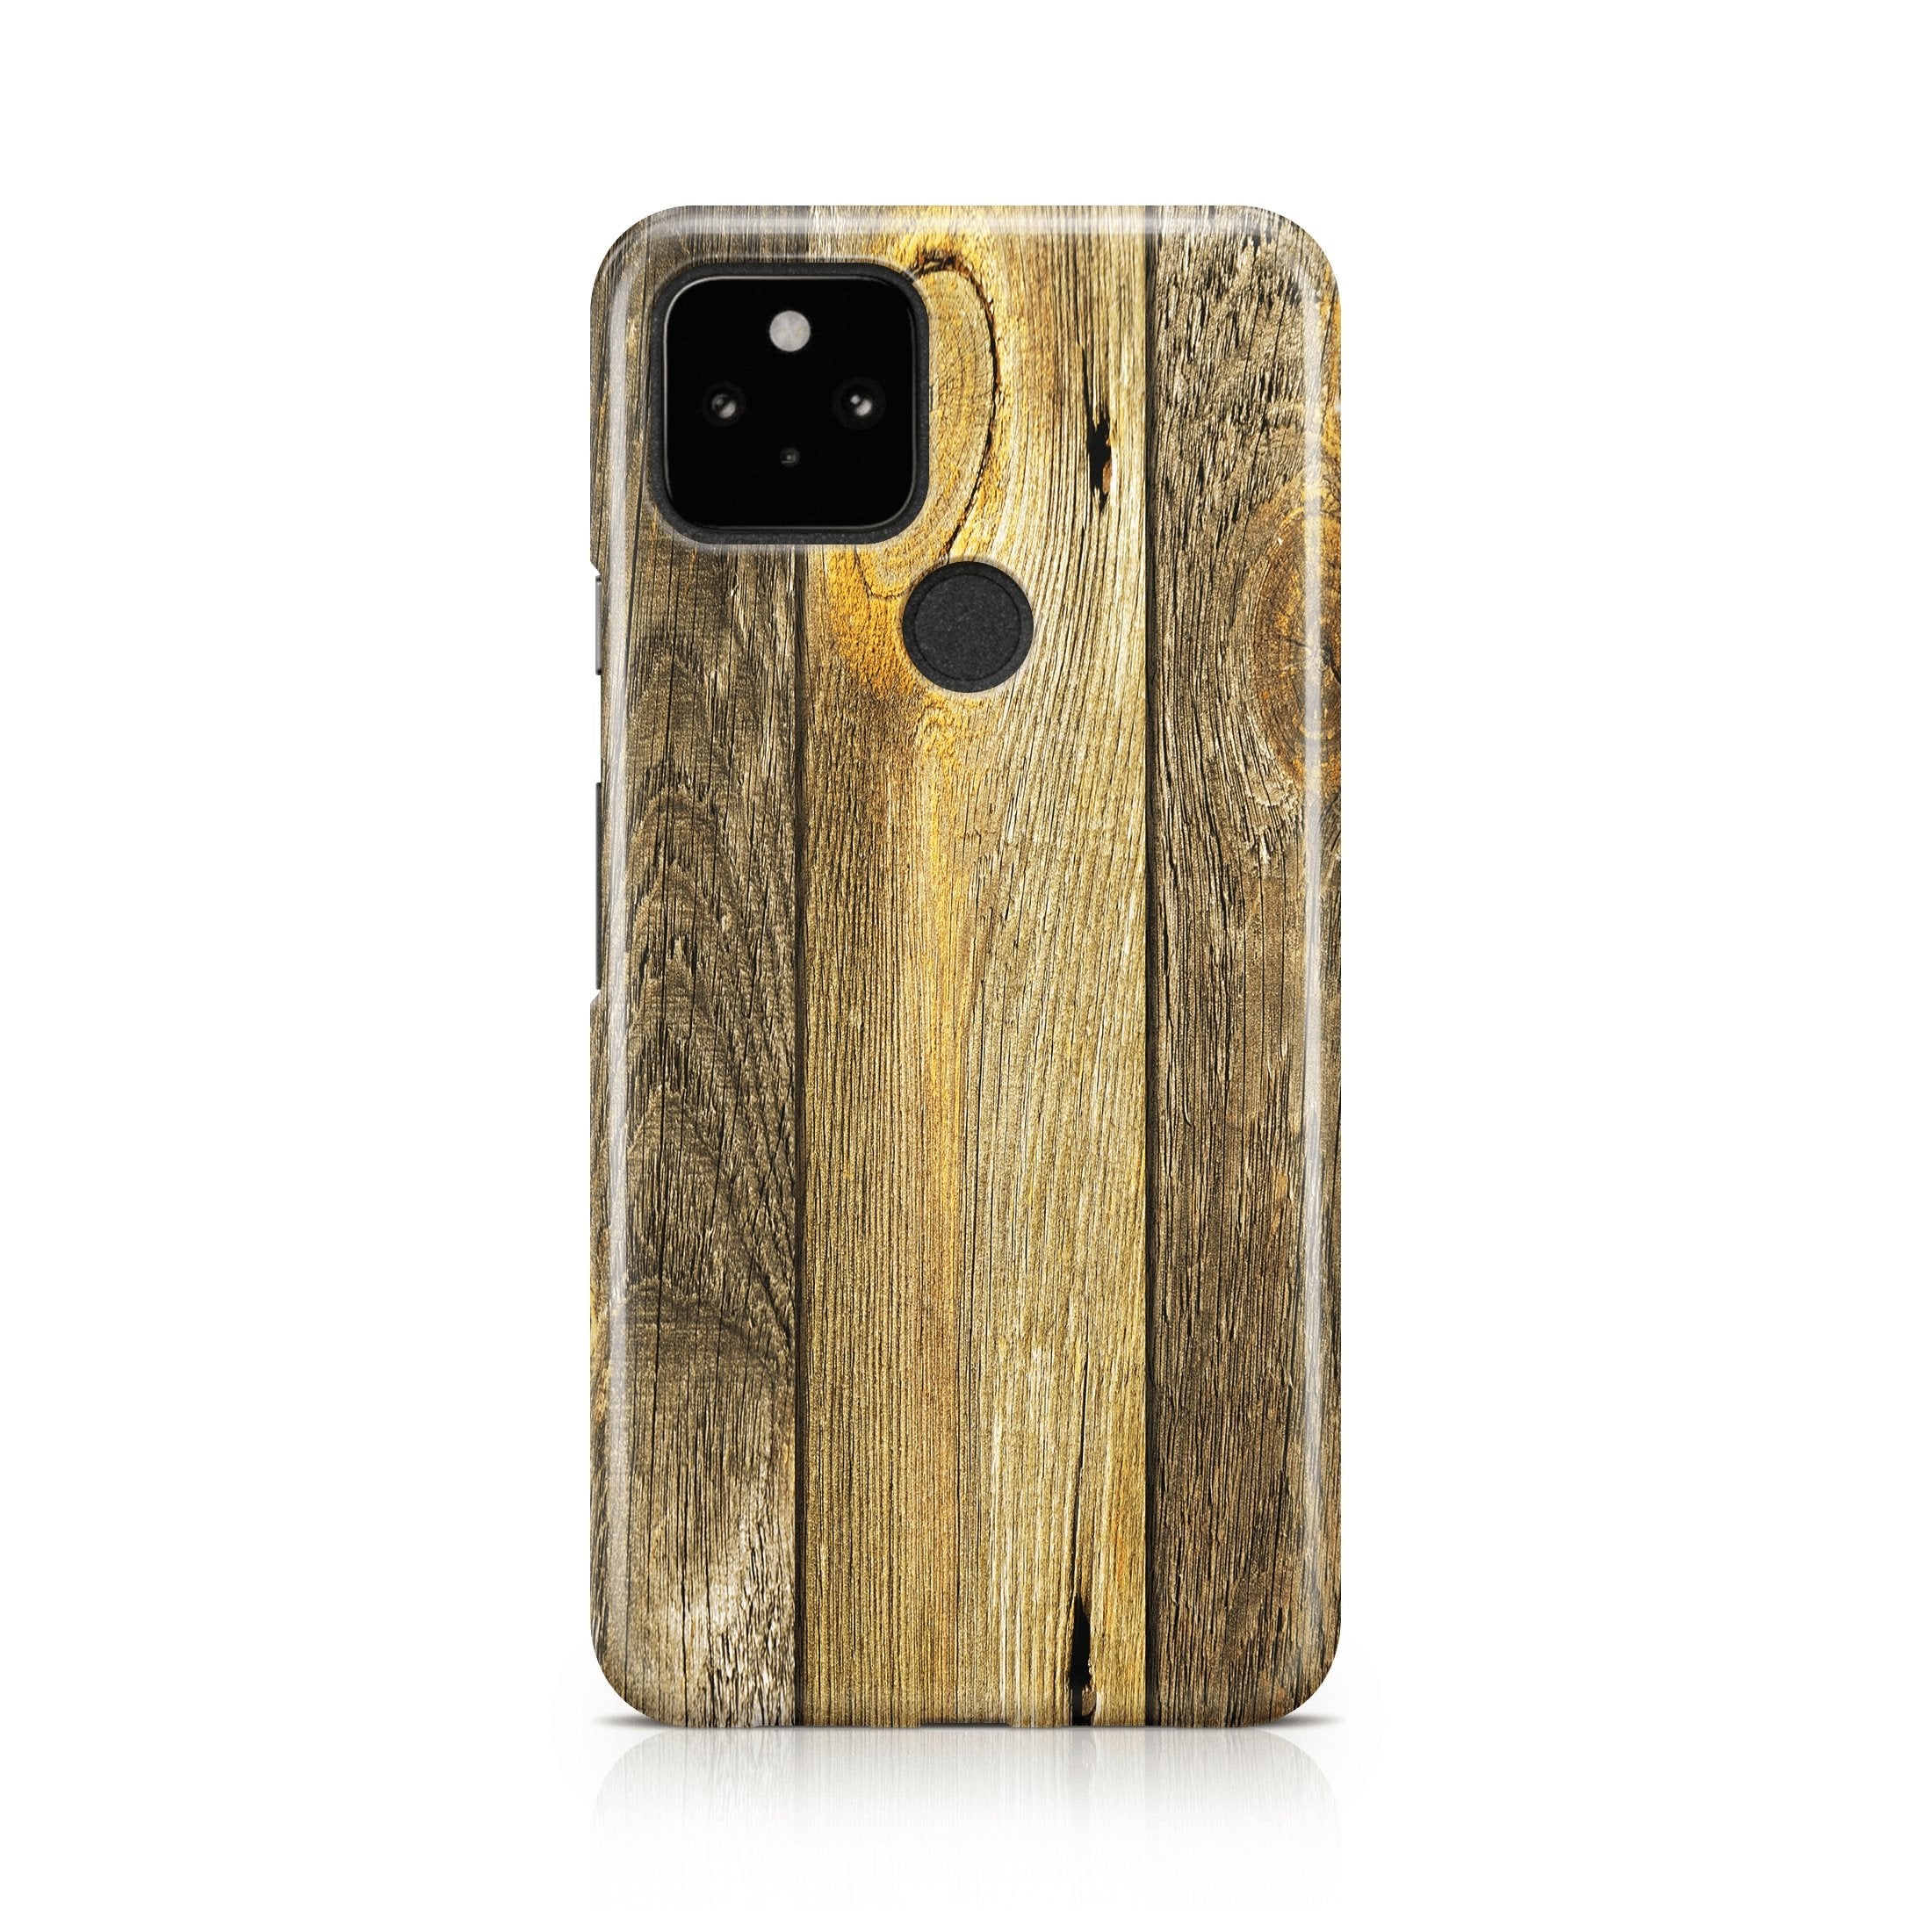 Distressed Wood - Google phone case designs by CaseSwagger